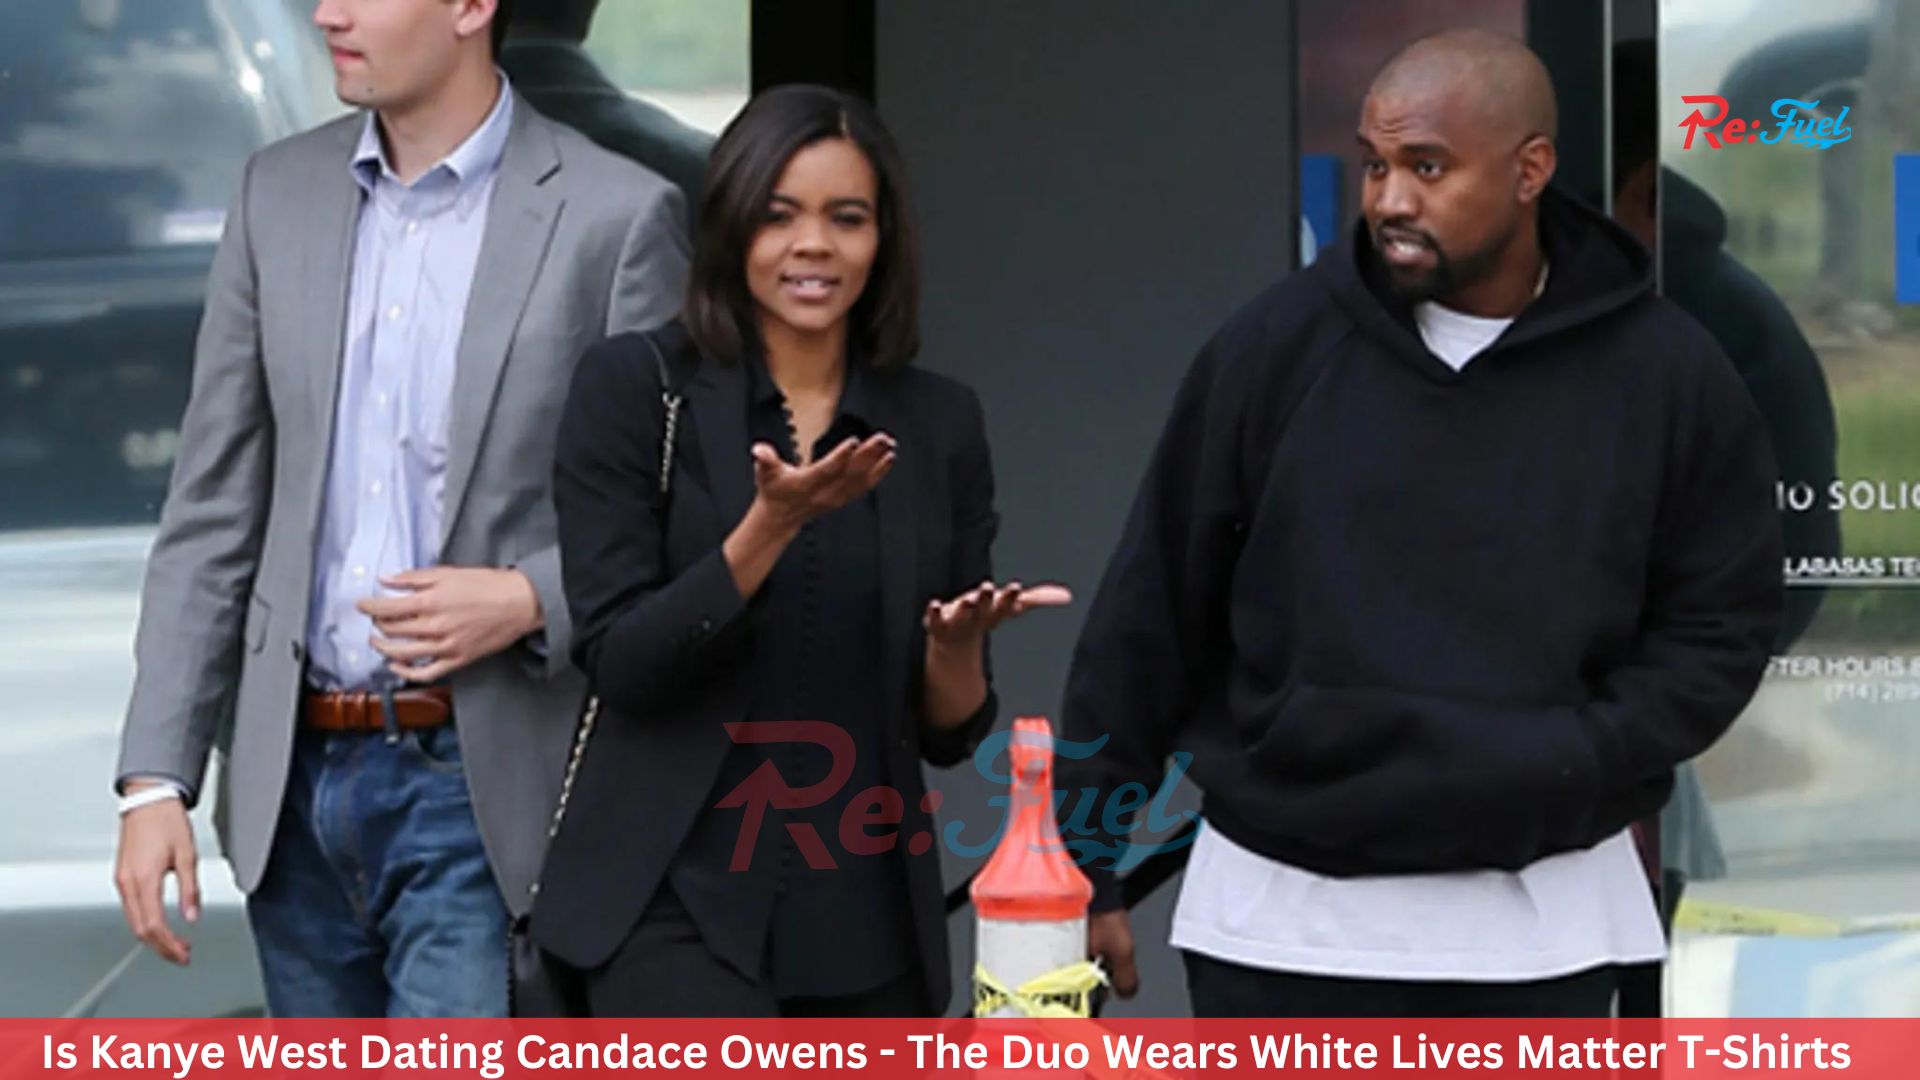 Is Kanye West Dating Candace Owens - The Duo Wears White Lives Matter T-Shirts